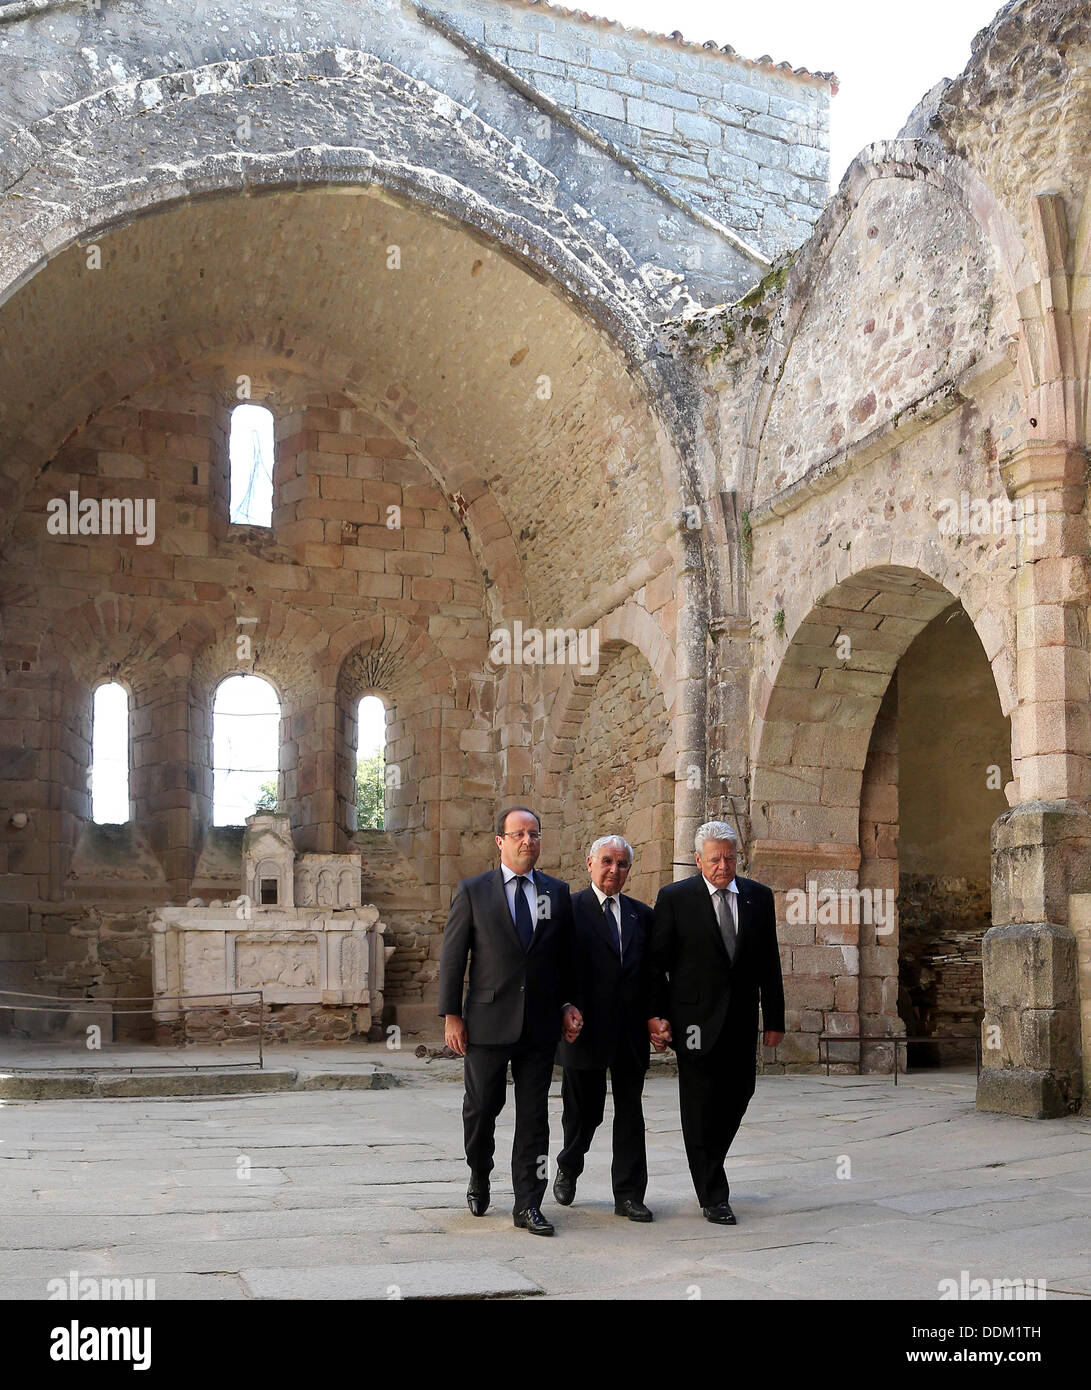 Oradour-sur-Glane, France. 04th Sep, 2013. German President Joachim Gauck (R), French President Francois Hollande (L) and survivor of the massacre in Oradour-sur-Glane during World War II Robert Hebras (C) are pictured at the memorial site in Oradour-sur-Glane, France, 04 September 2013. A unit of SS officers murdered 642 citizens of the town in June 1944. The German President is on a three-day visit to France. Photo: WOLFGANG KUMM/dpa/Alamy Live News Stock Photo